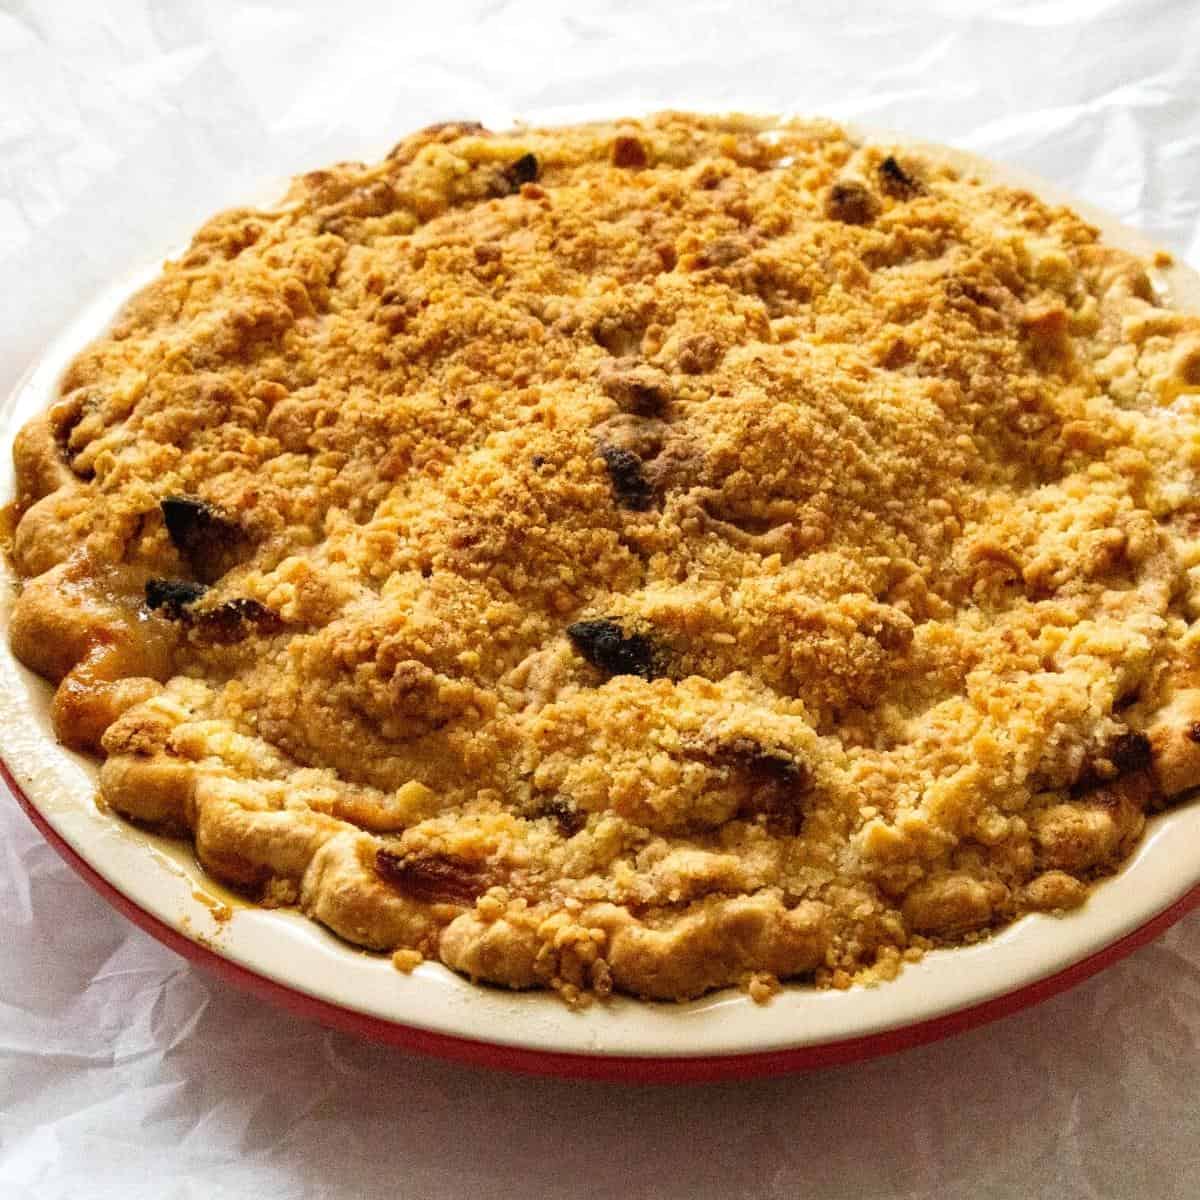 A pie pan with apple and crumbles.